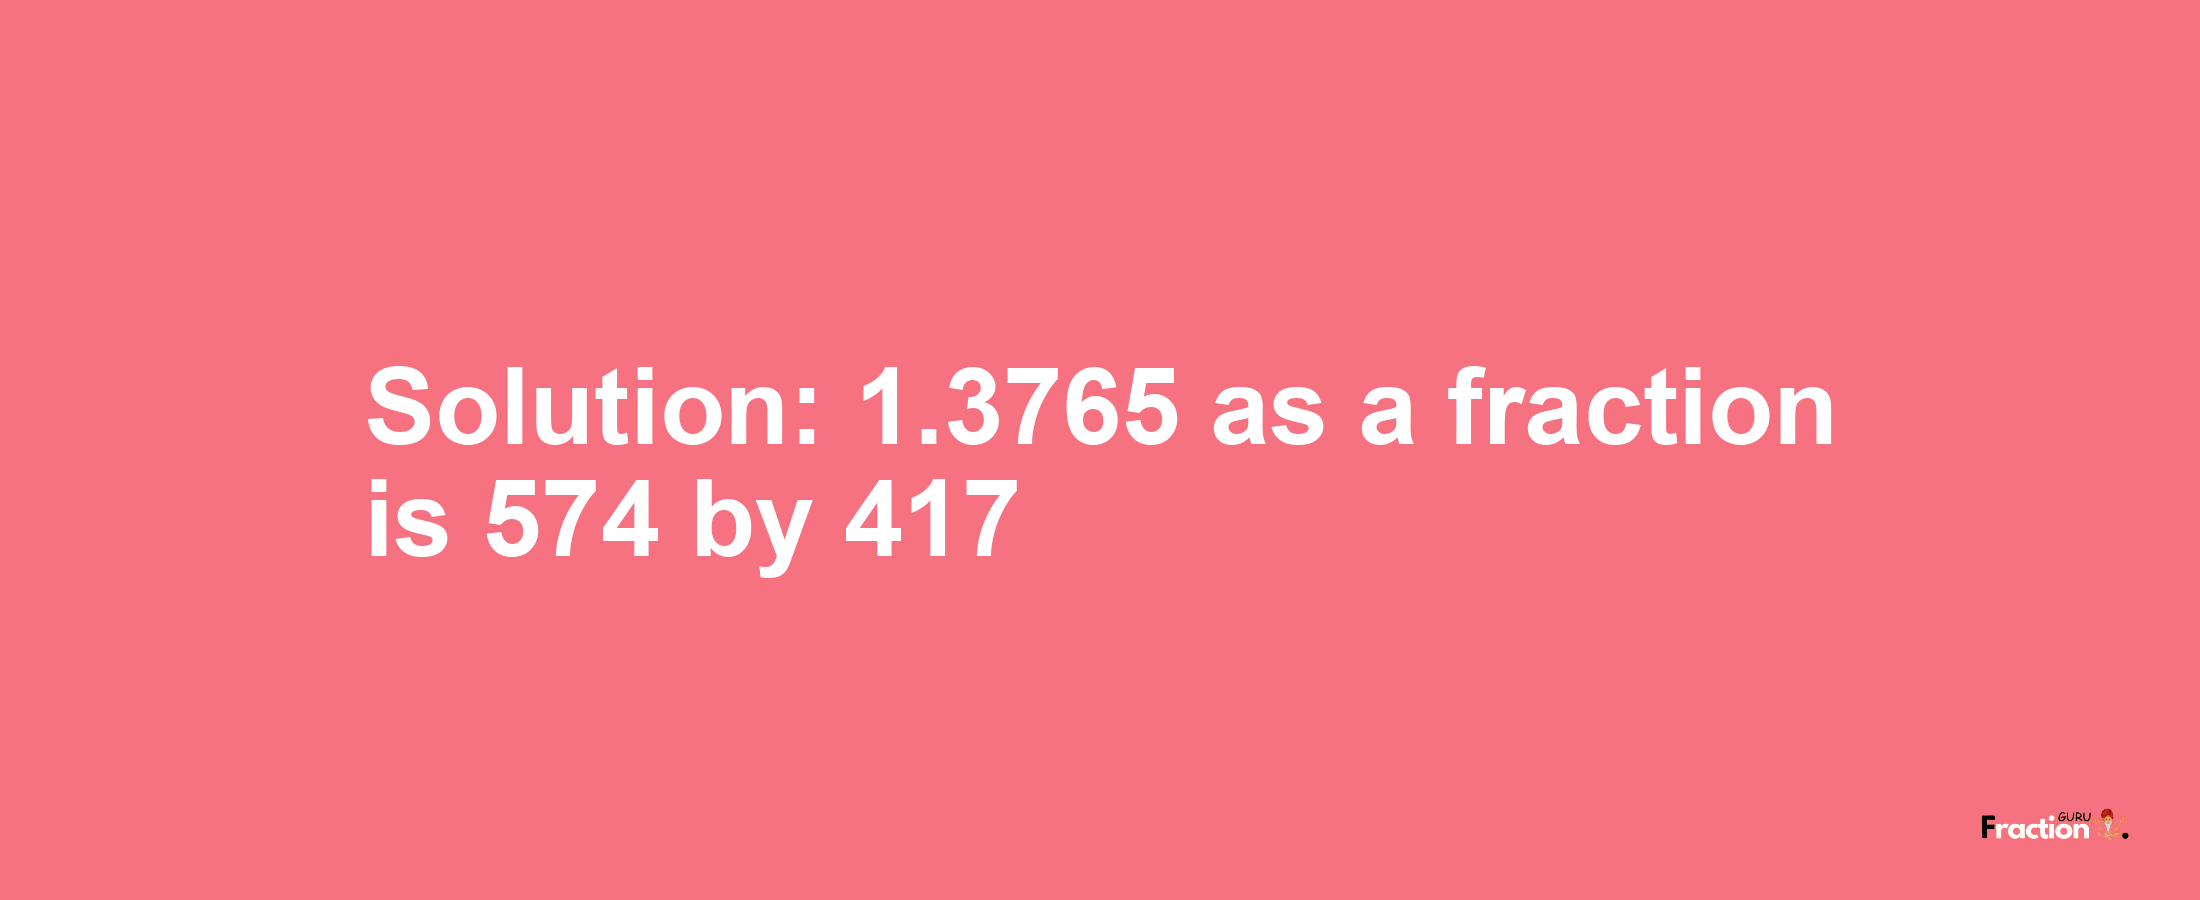 Solution:1.3765 as a fraction is 574/417